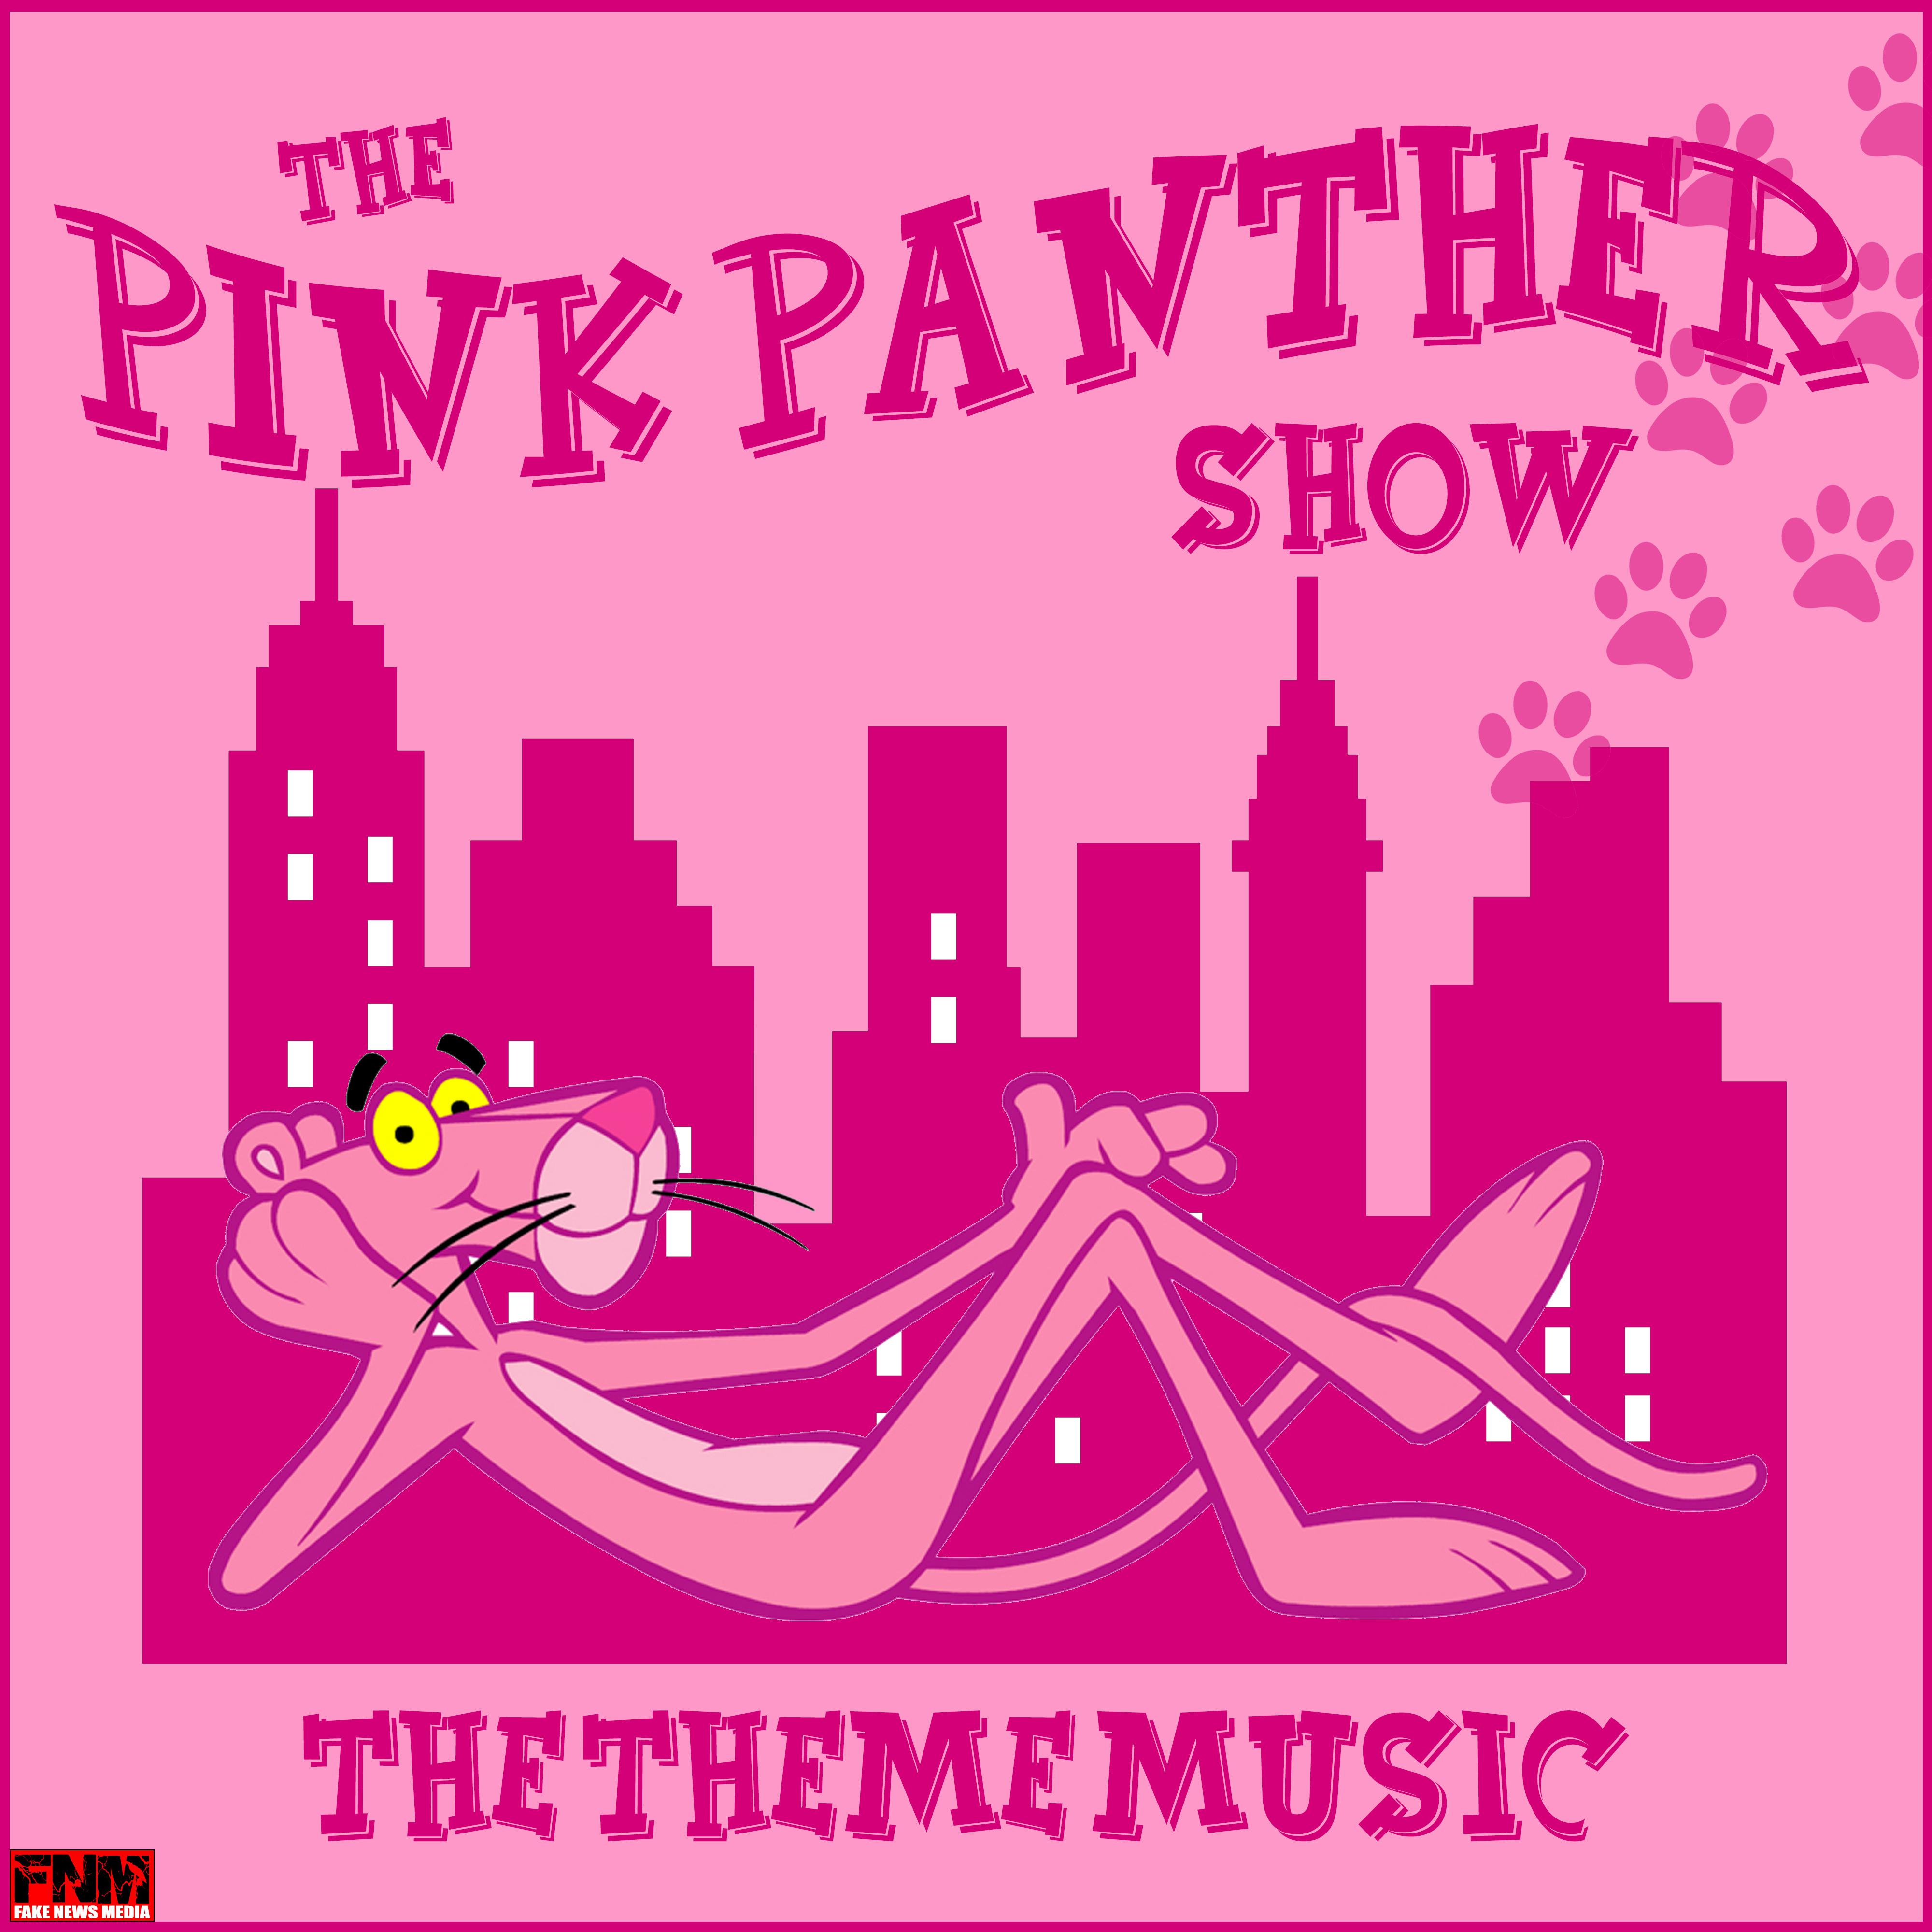 The Pink Panther Show - The Theme Music